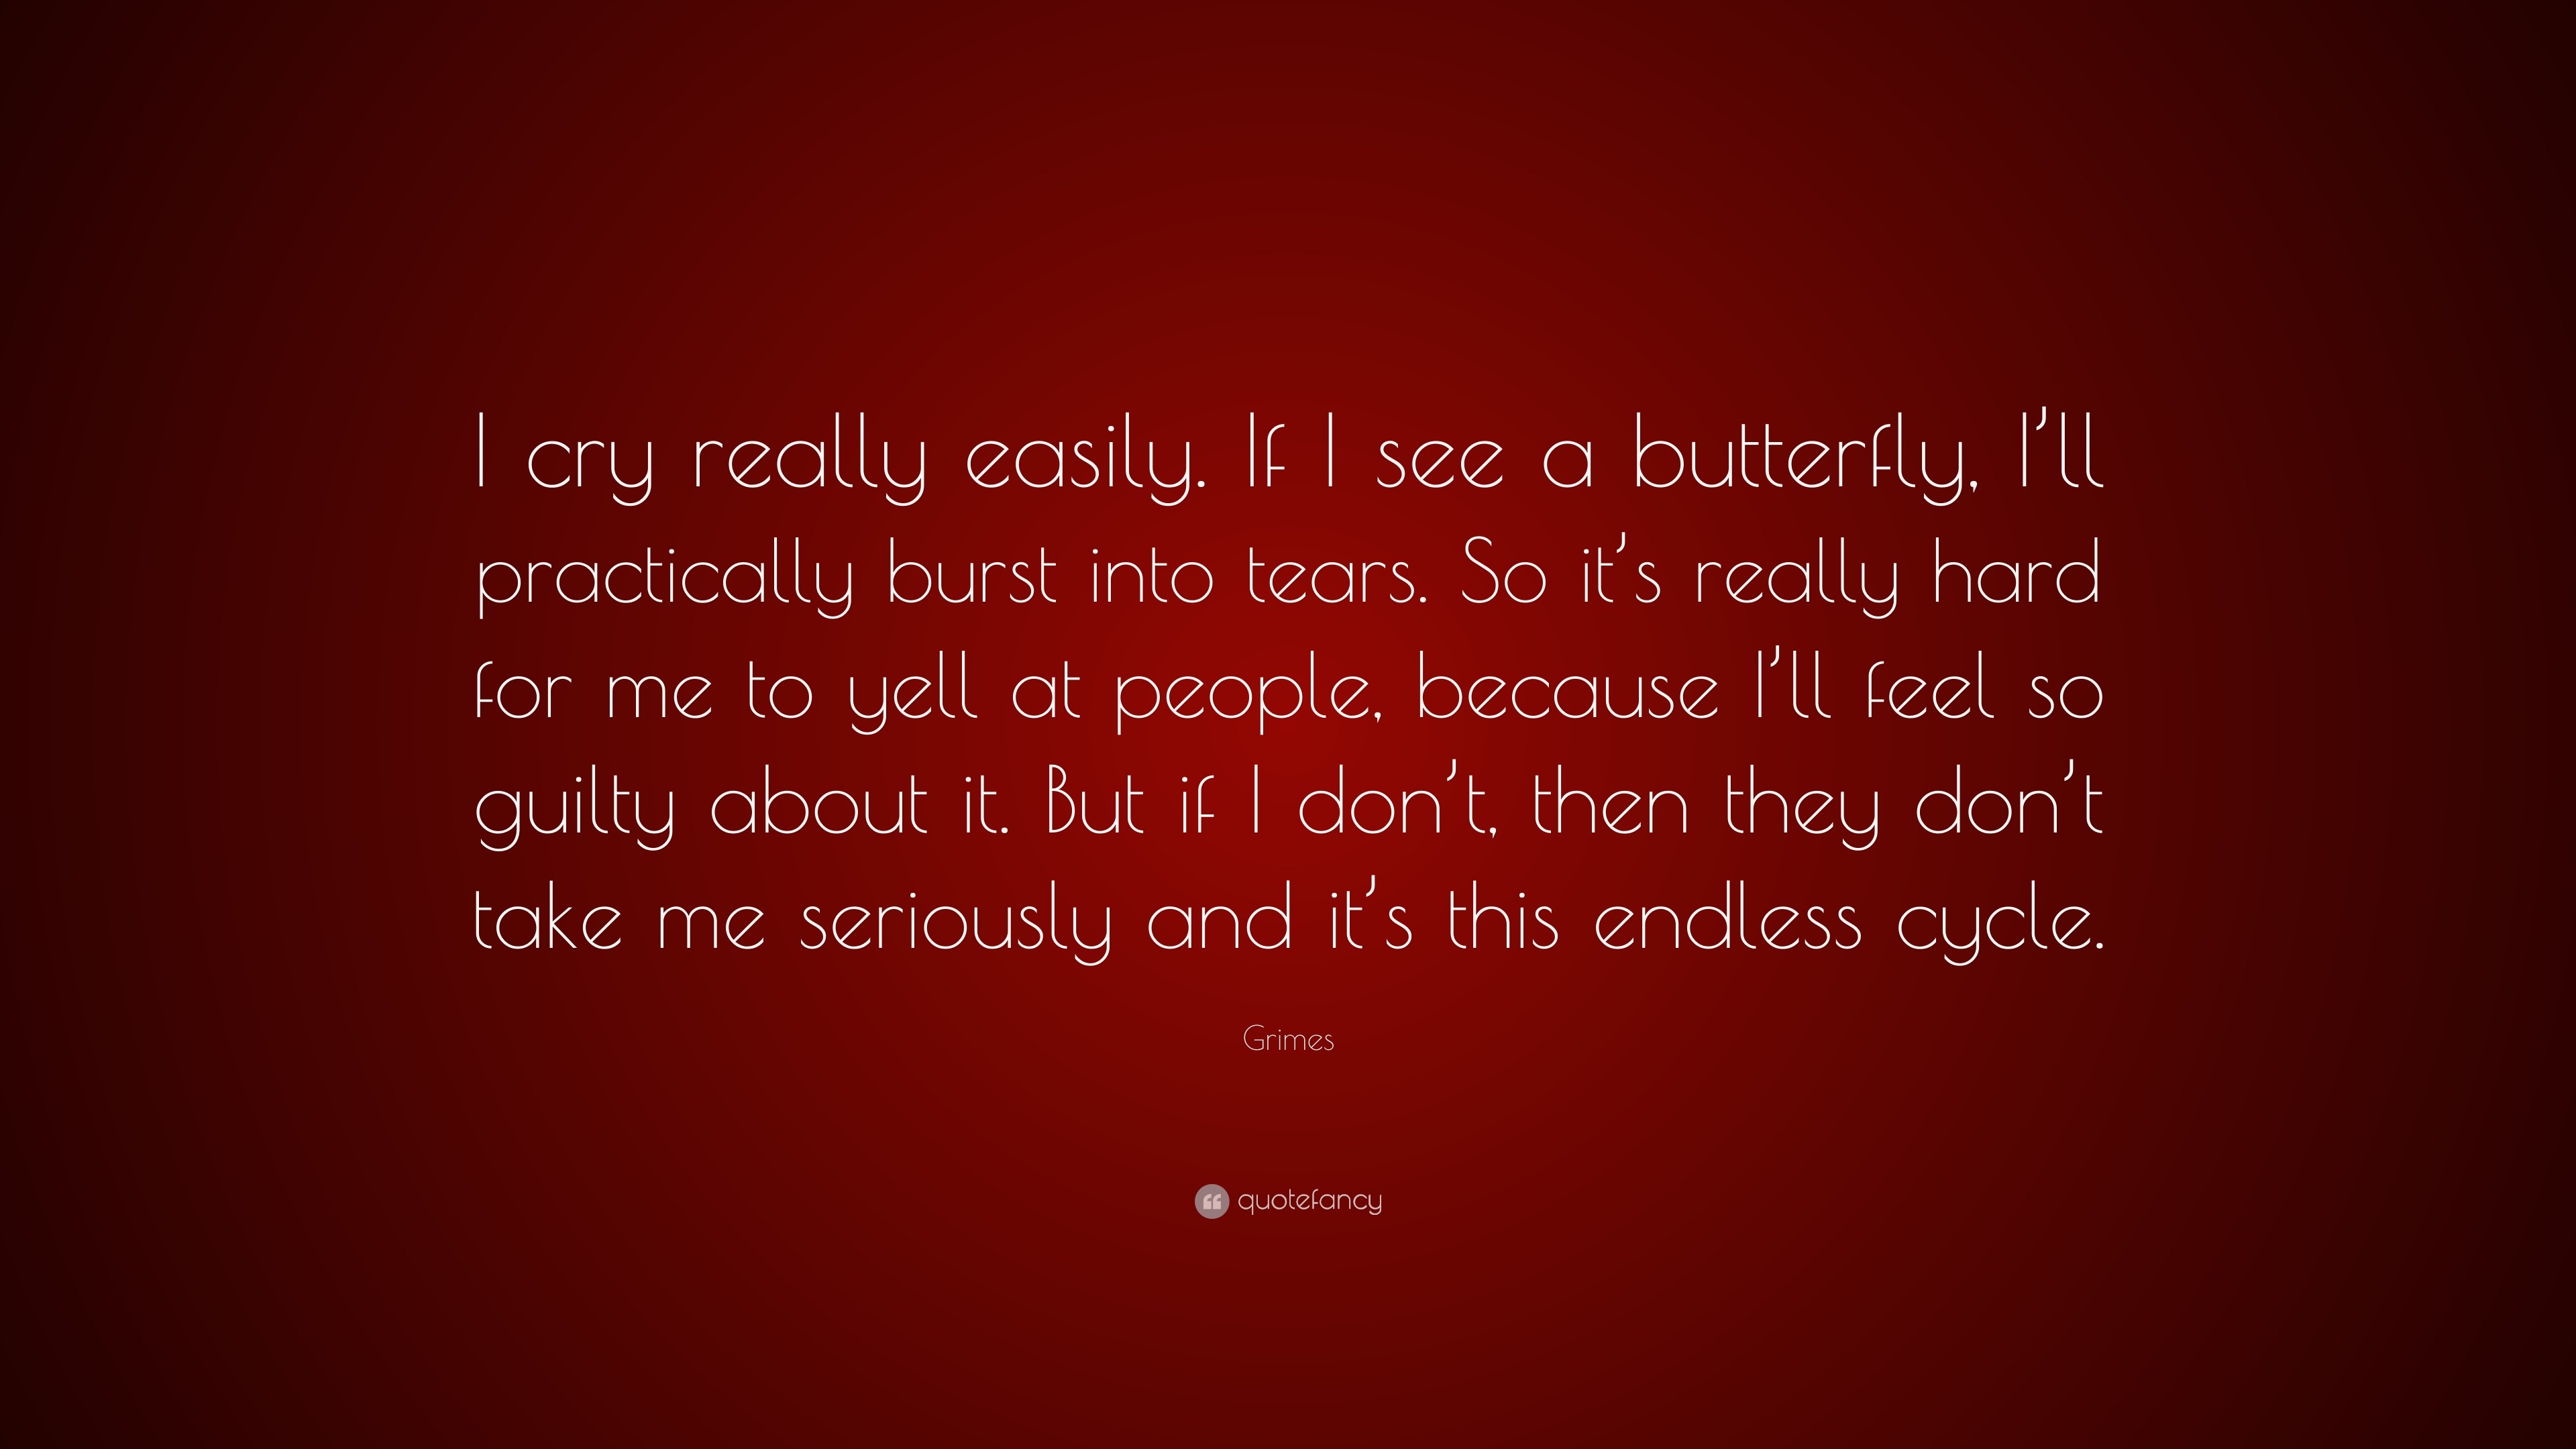 Grimes Quote “i Cry Really Easily If I See A Butterfly I Ll Practically Burst Into Tears So